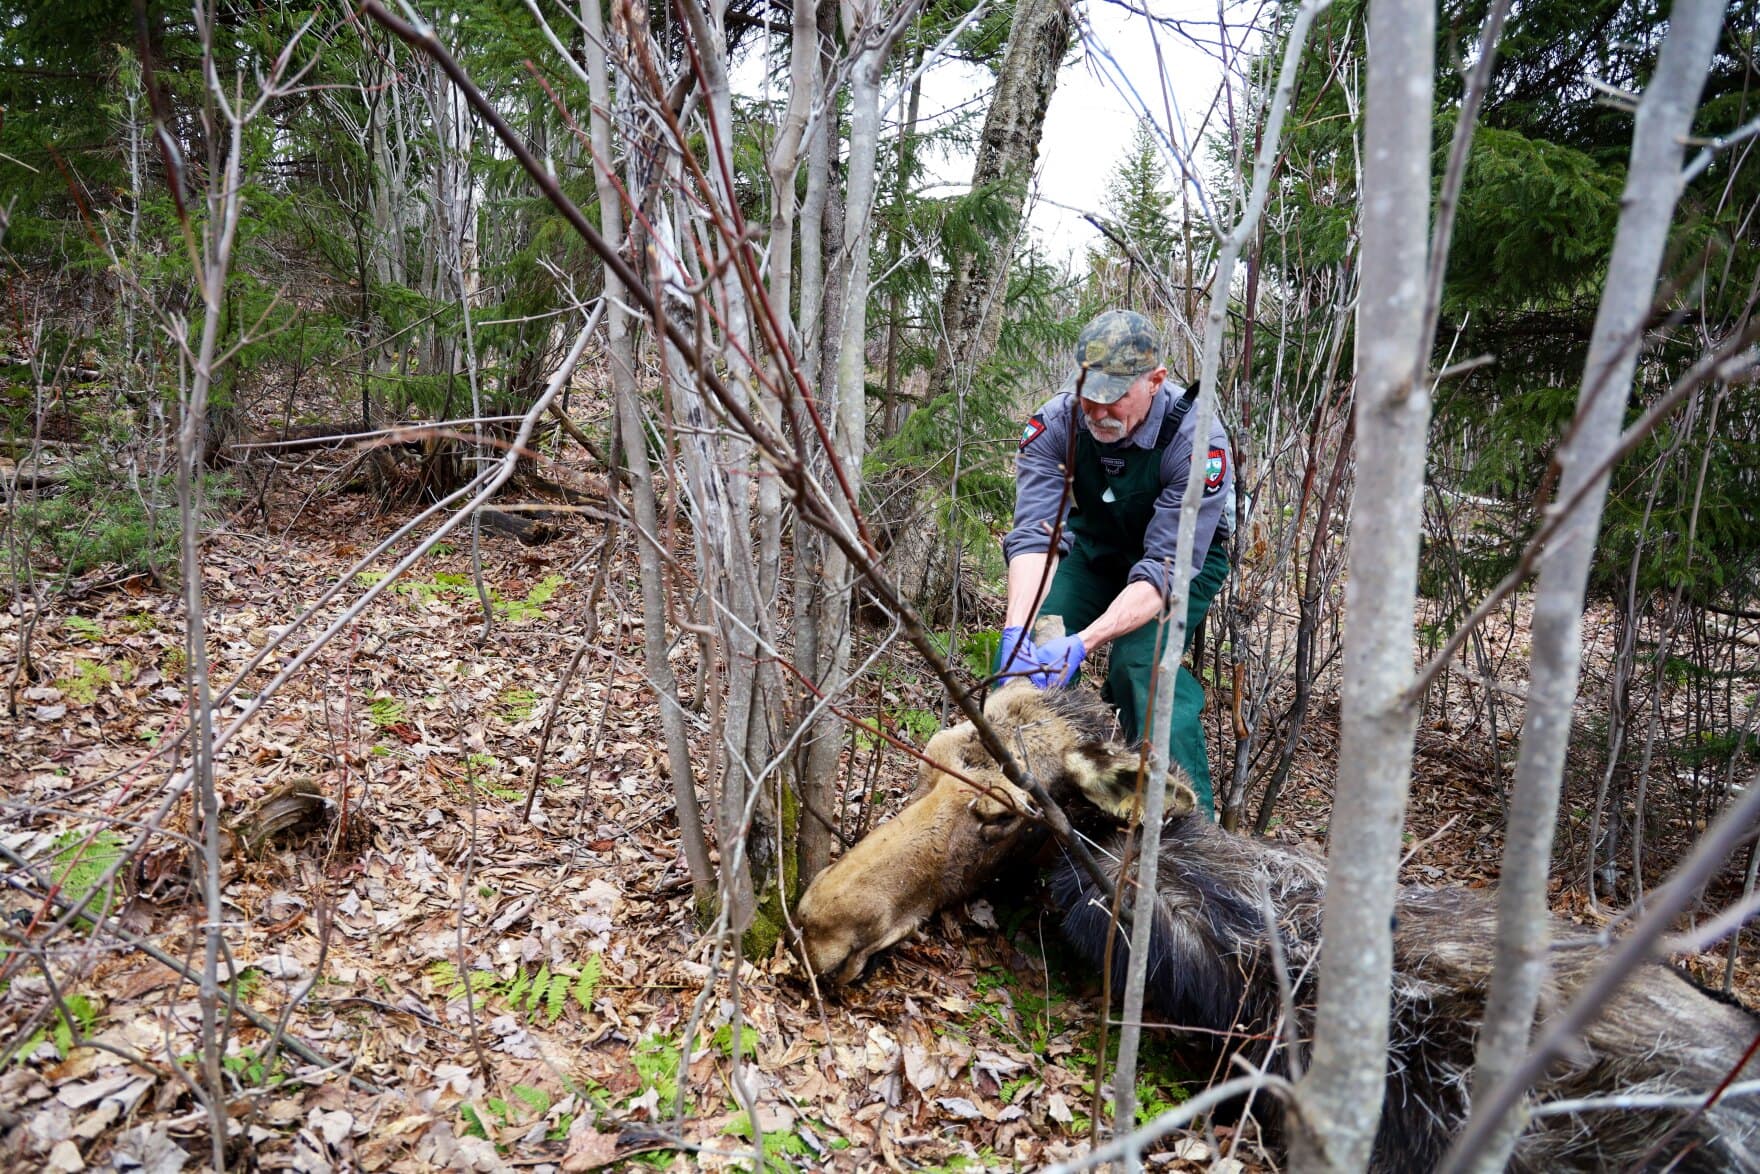 Winter ticks wiped out nearly 90% of the moose calves scientists tracked in  part of Maine last year | WBUR News